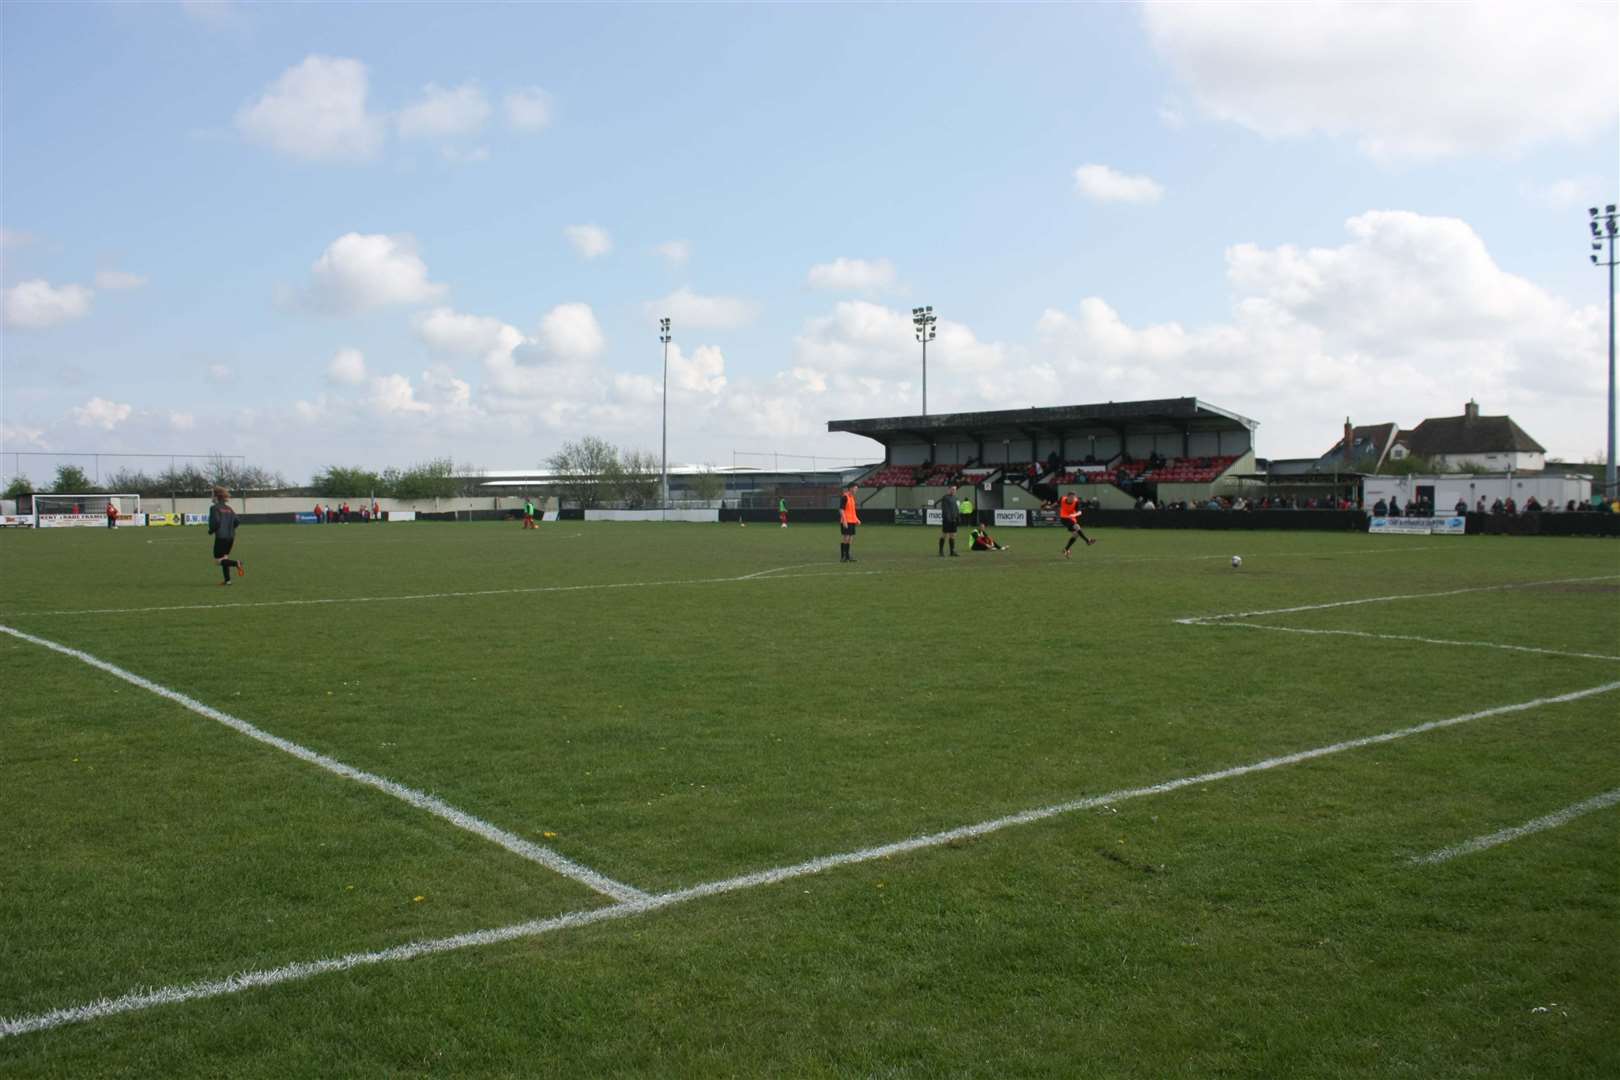 Sittingbourne FC managed to plunge into financial difficulties after overspending on the Central Park stadium